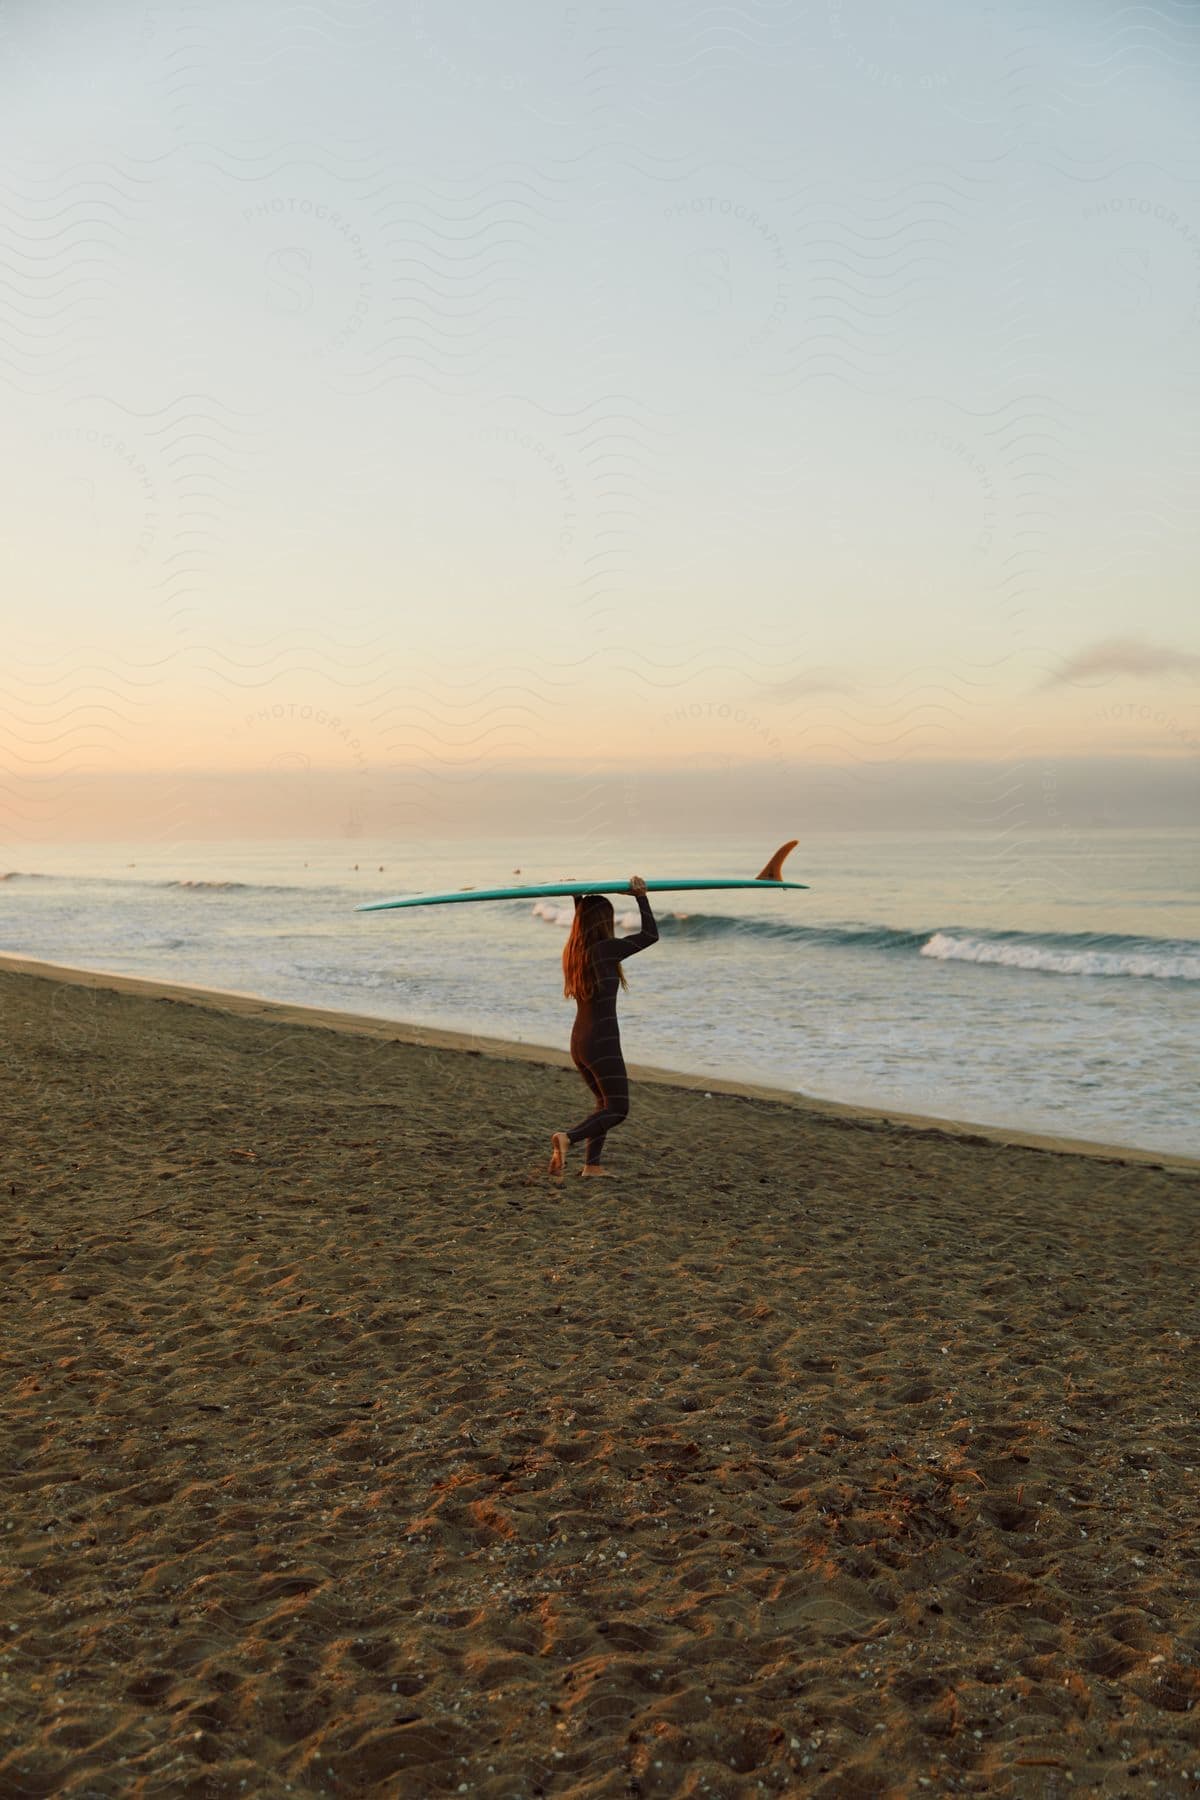 A woman walks to the water on the beach with a surfboard over her head